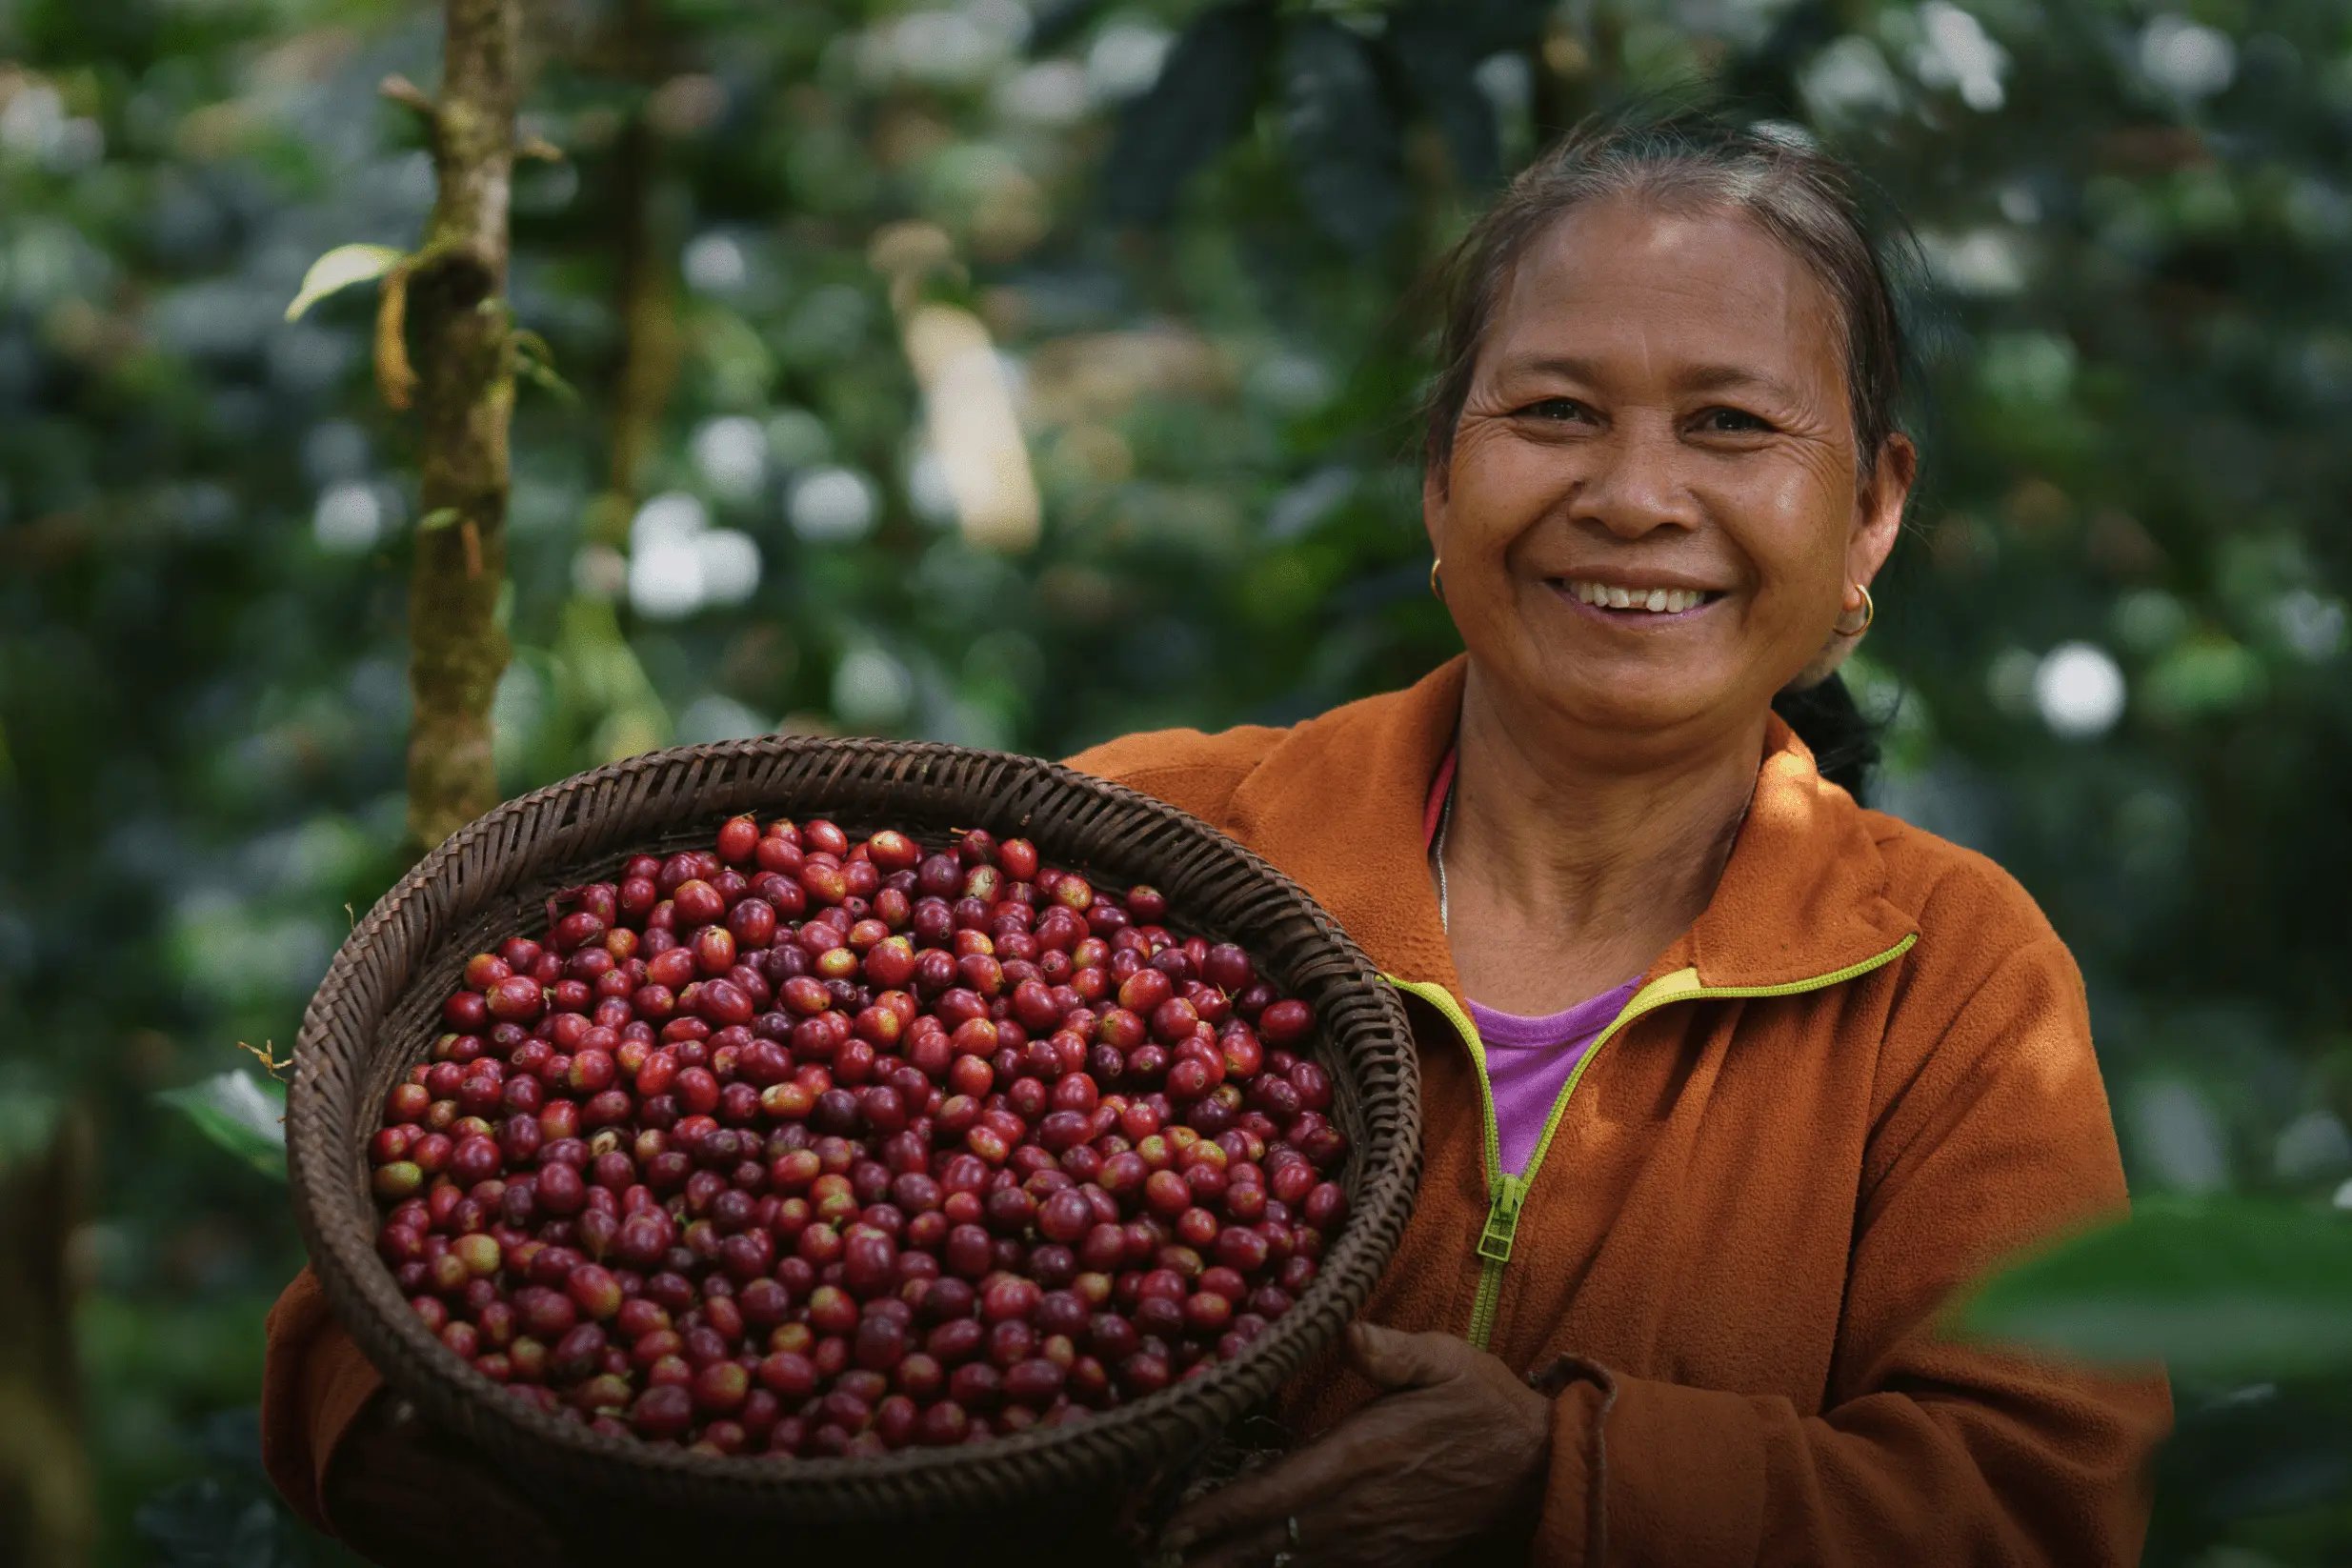 Slow Coffee and WWF partner to boost sustainable coffee farming in Southeast Asia prioritizing nature, communities, and biodiversity with P4G support